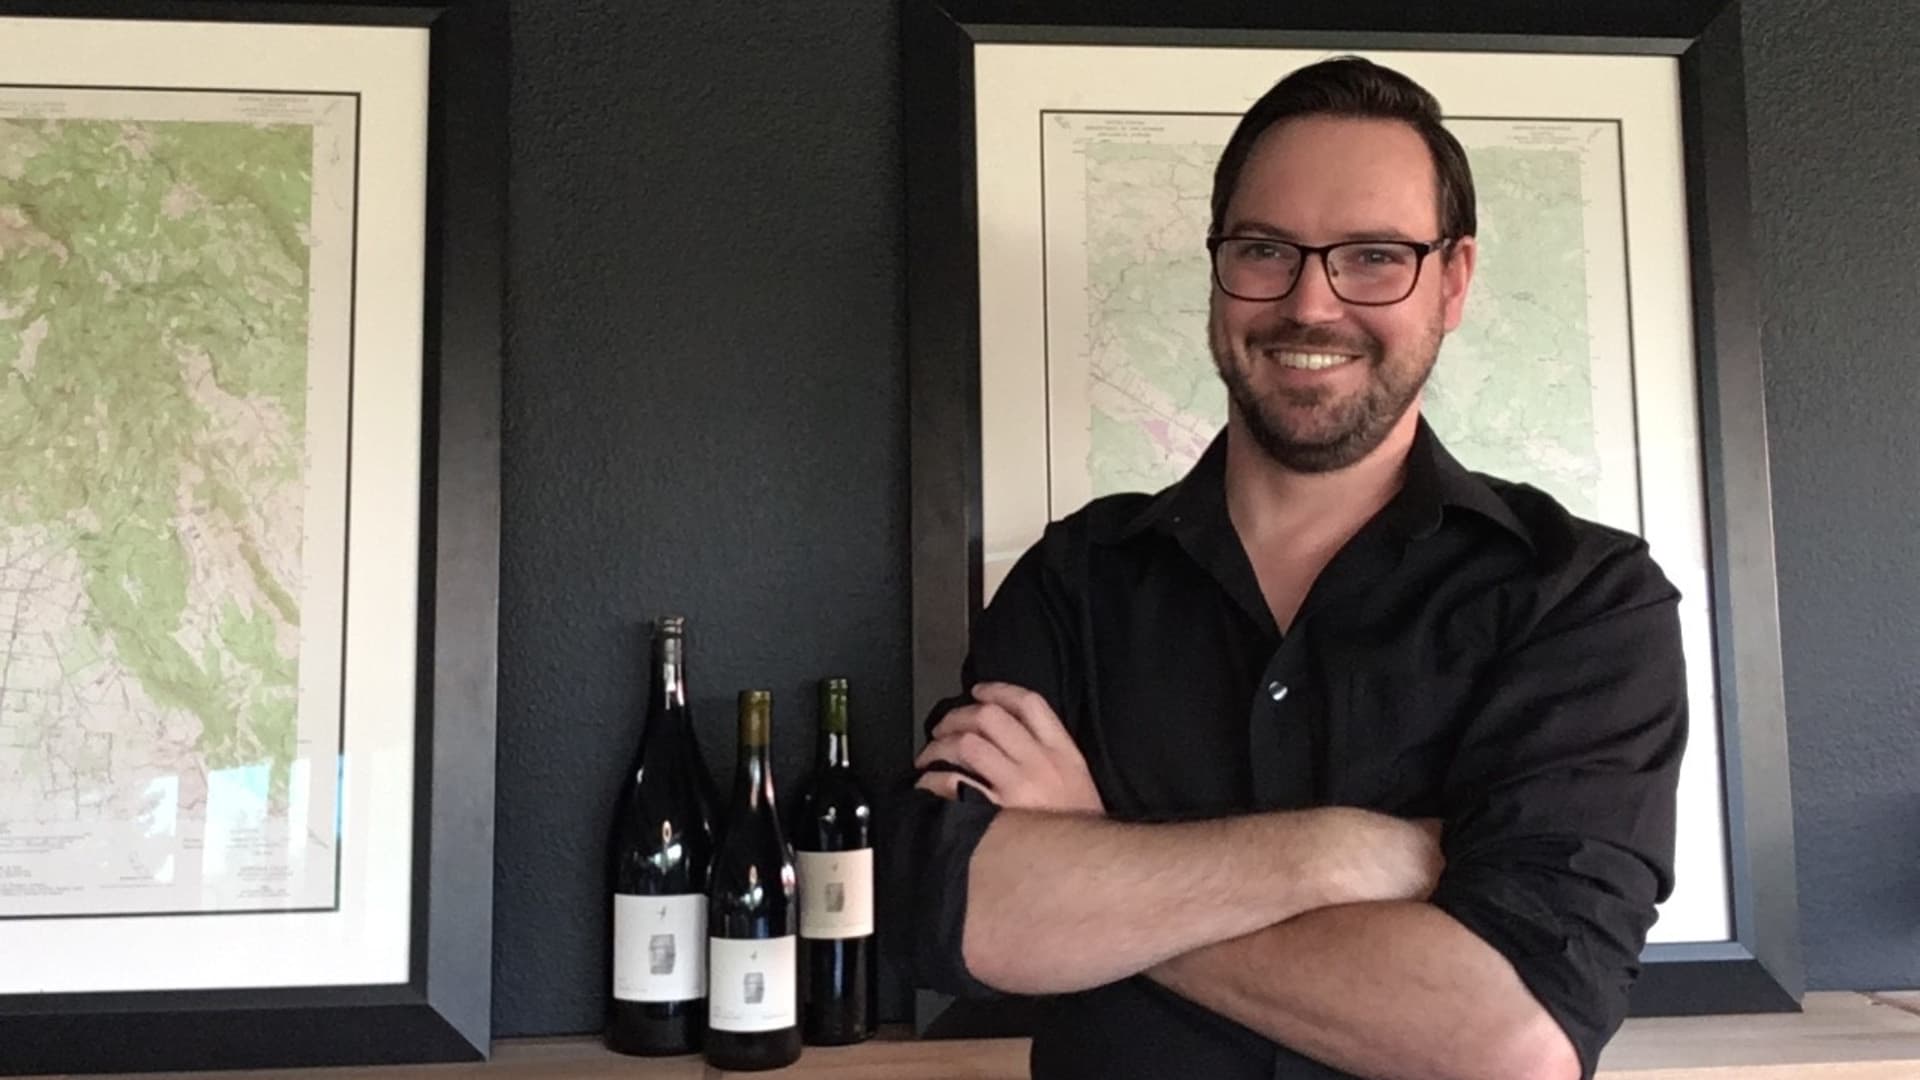 Ian O'Reilly moved to Napa Valley without a job; he now holds two positions in the wine industry.